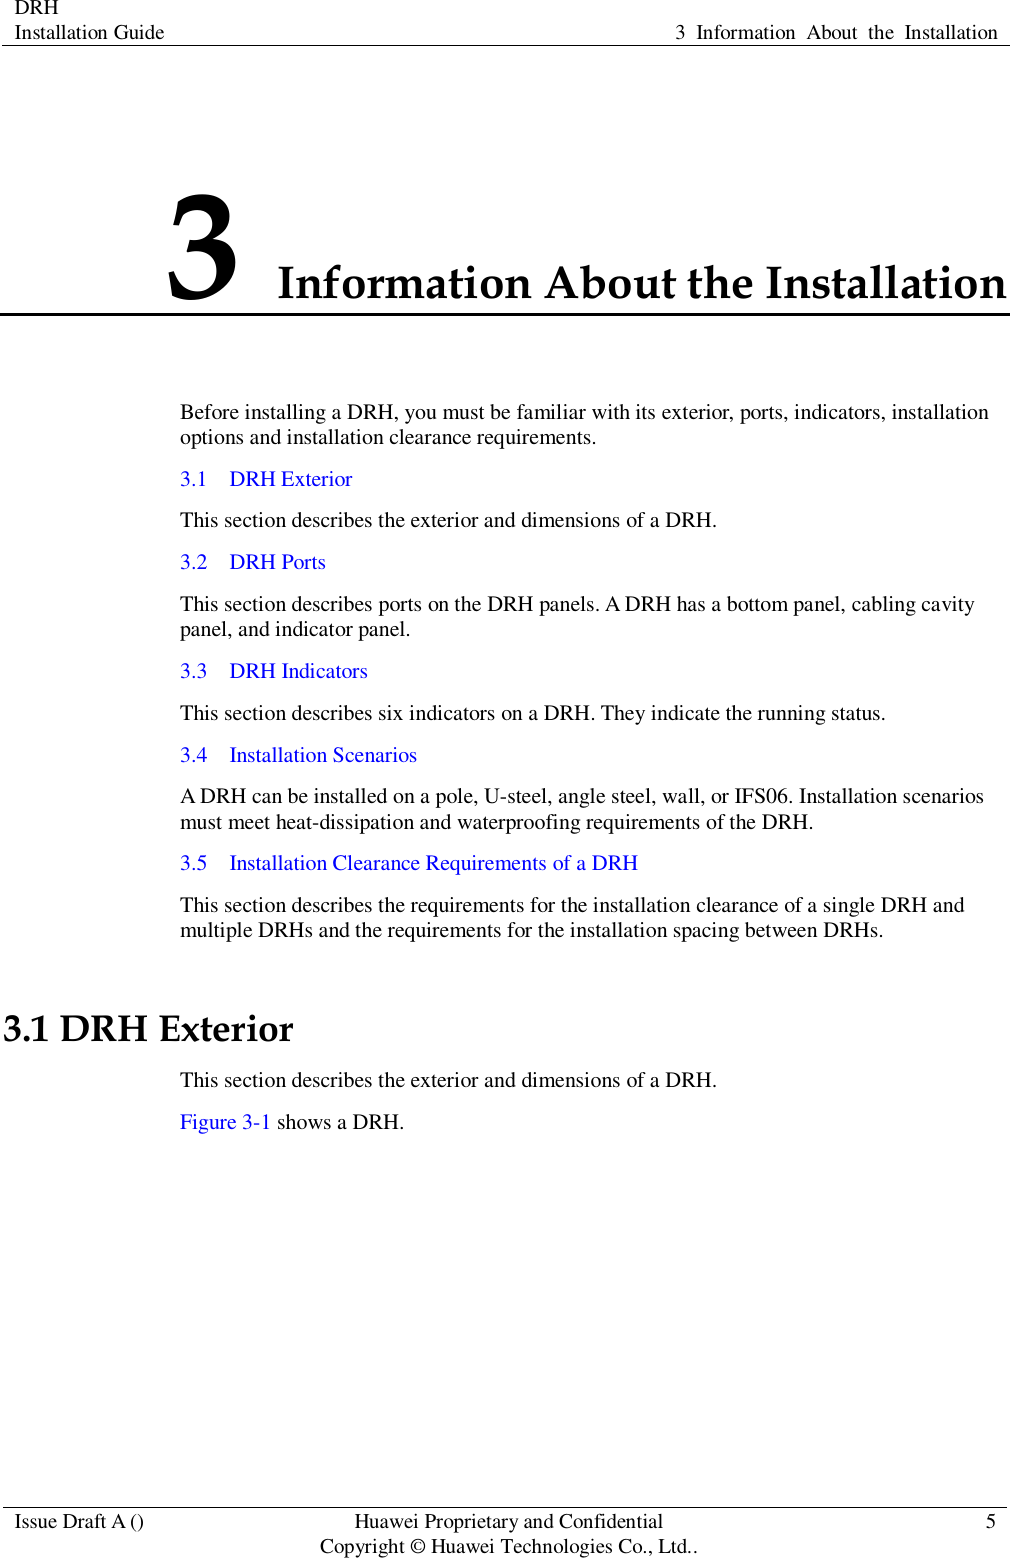 DRH   Installation Guide 3  Information  About  the  Installation  Issue Draft A () Huawei Proprietary and Confidential                                     Copyright © Huawei Technologies Co., Ltd.. 5  3 Information About the Installation Before installing a DRH, you must be familiar with its exterior, ports, indicators, installation options and installation clearance requirements. 3.1    DRH Exterior This section describes the exterior and dimensions of a DRH. 3.2    DRH Ports This section describes ports on the DRH panels. A DRH has a bottom panel, cabling cavity panel, and indicator panel. 3.3    DRH Indicators This section describes six indicators on a DRH. They indicate the running status.   3.4    Installation Scenarios A DRH can be installed on a pole, U-steel, angle steel, wall, or IFS06. Installation scenarios must meet heat-dissipation and waterproofing requirements of the DRH. 3.5    Installation Clearance Requirements of a DRH This section describes the requirements for the installation clearance of a single DRH and multiple DRHs and the requirements for the installation spacing between DRHs. 3.1 DRH Exterior This section describes the exterior and dimensions of a DRH. Figure 3-1 shows a DRH.   